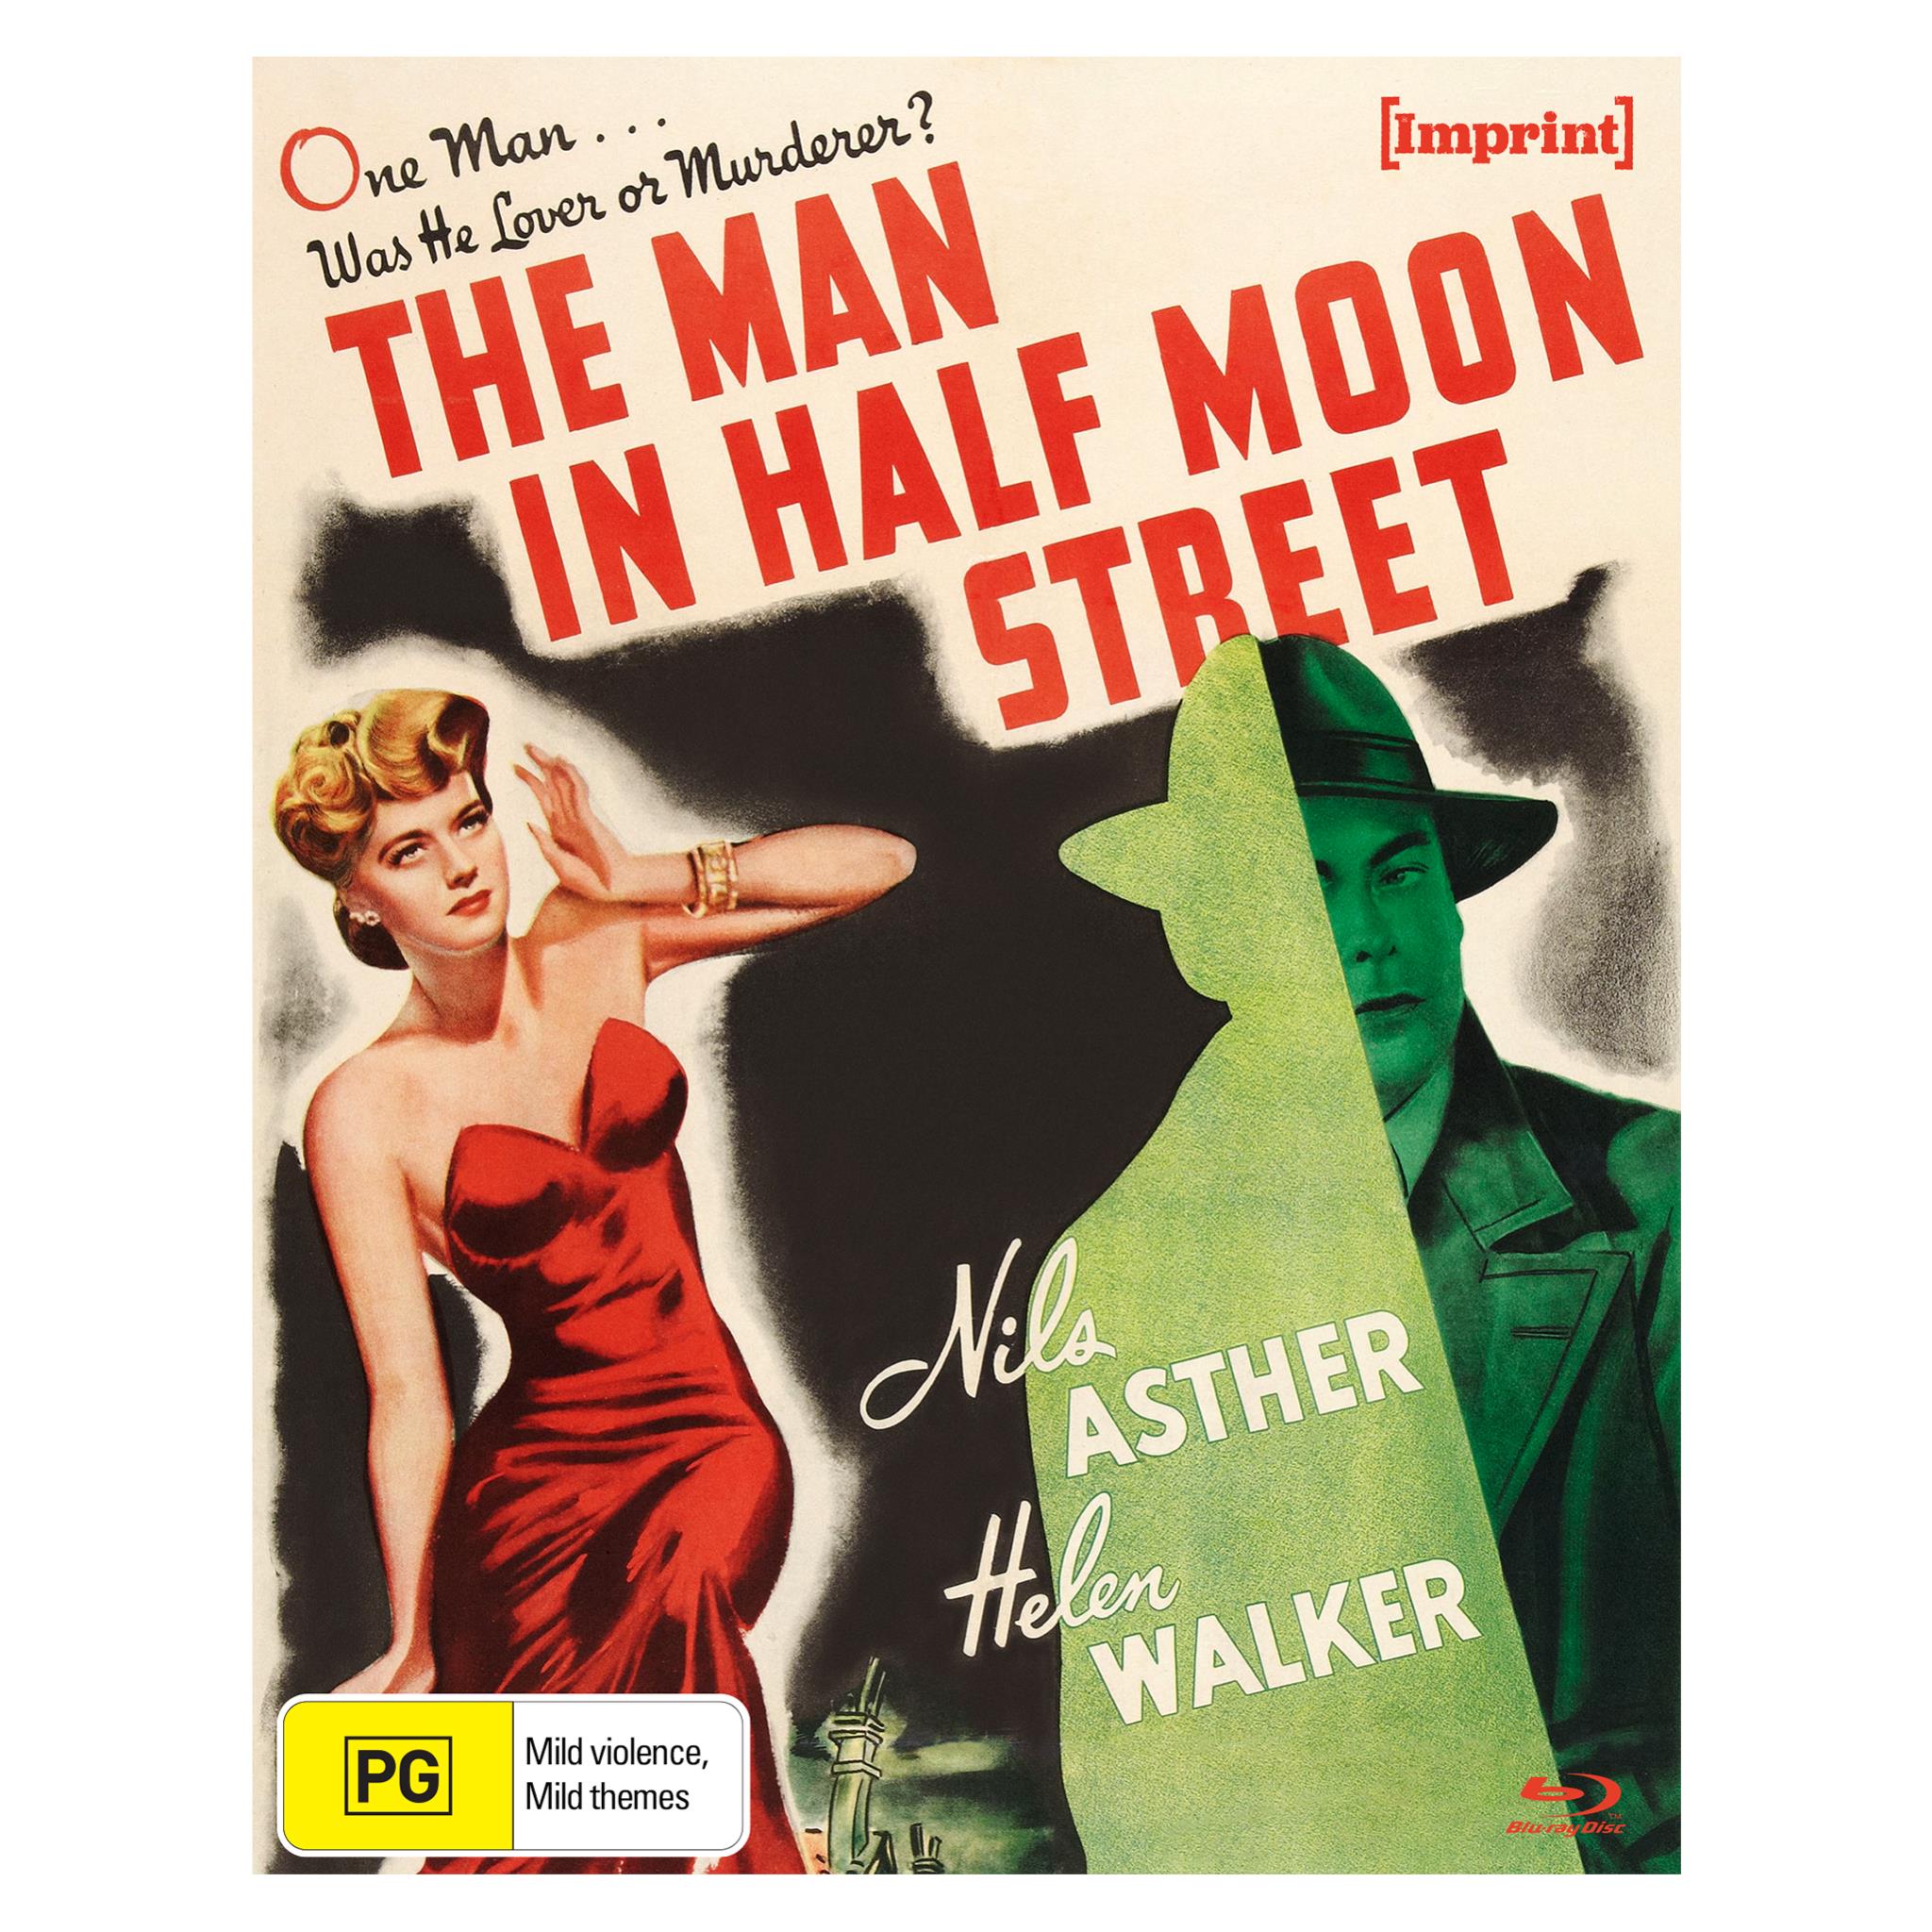 man in half moon street, the (imprint collection)